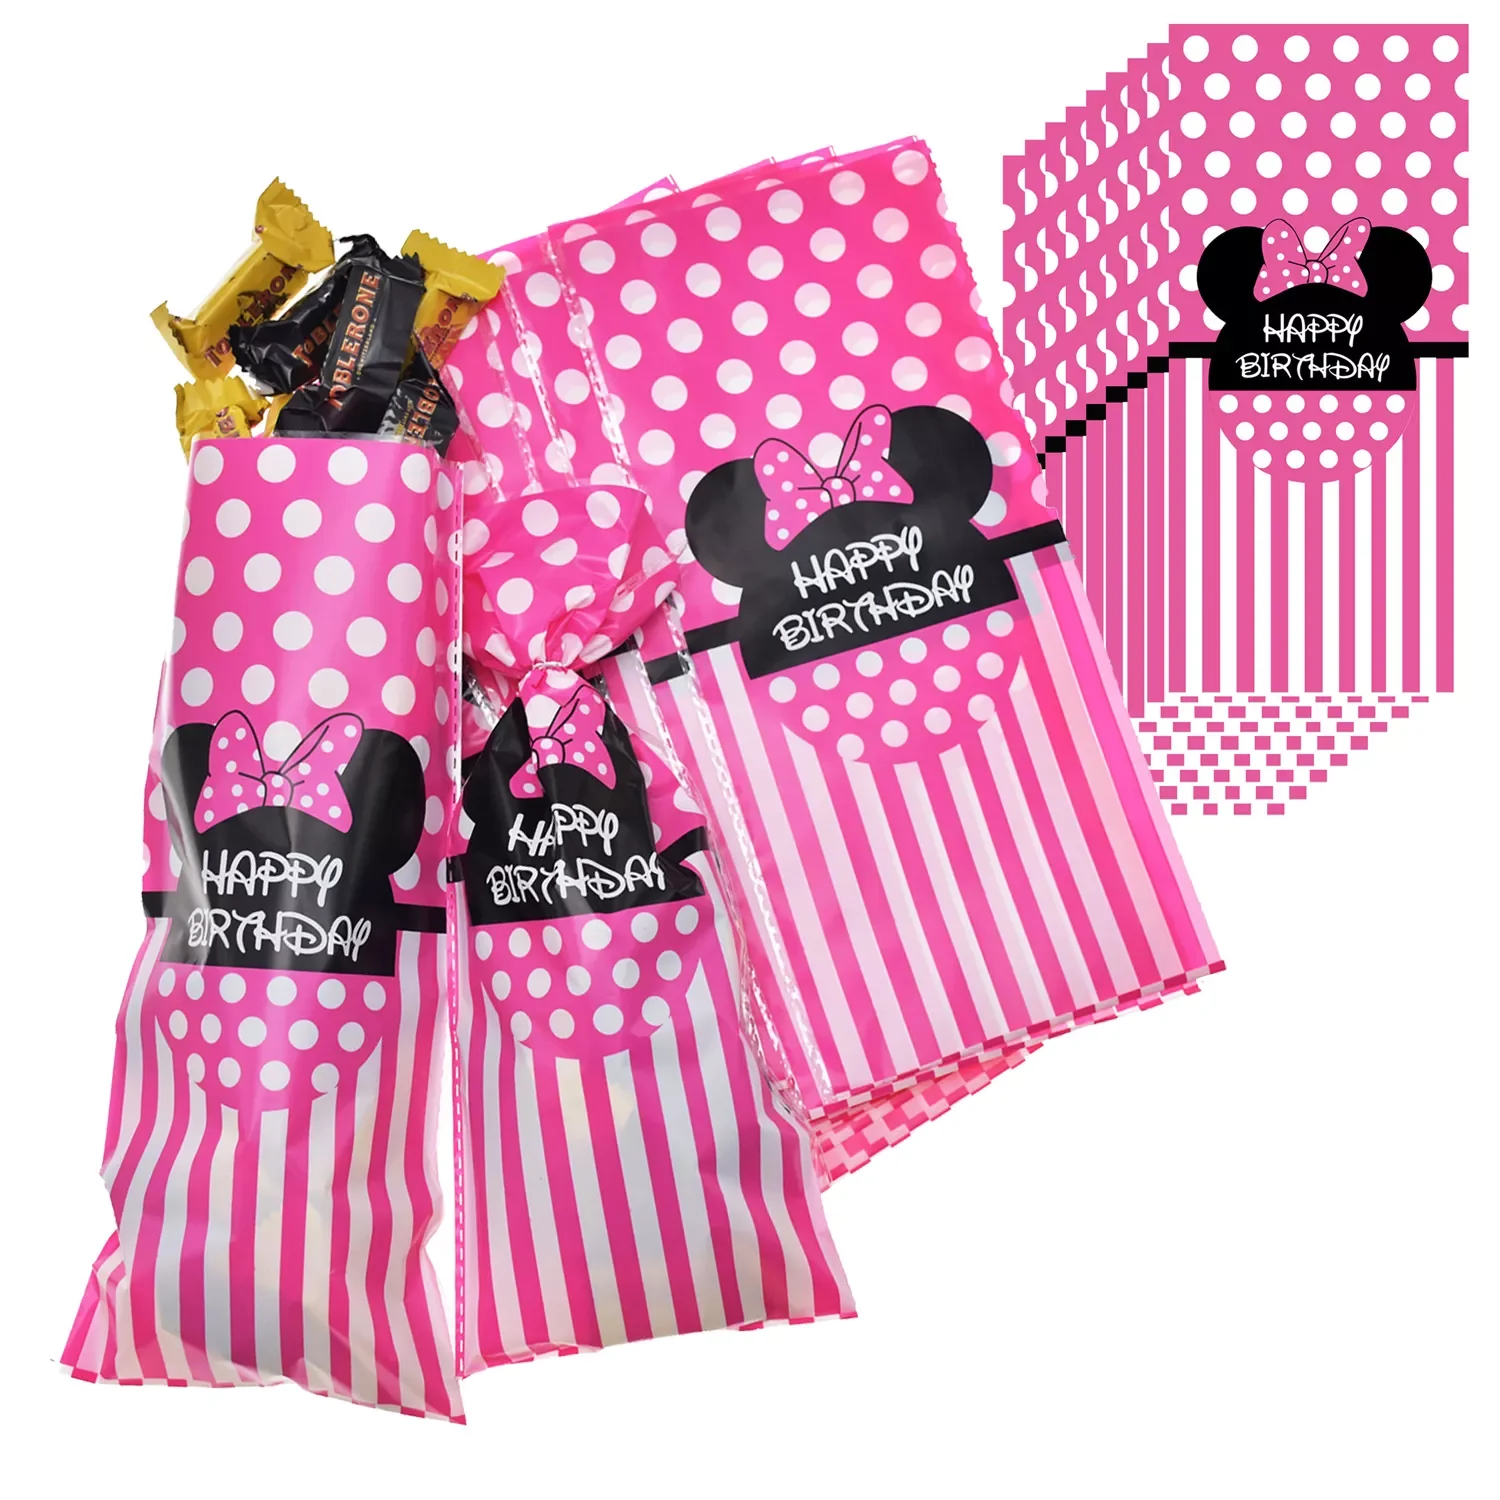 

Pink Minnie Ears Cellophane Treat Bags Good for Bakery Cookies Candies Dessert with Sliver Twist Ties for Birthday Party Favors